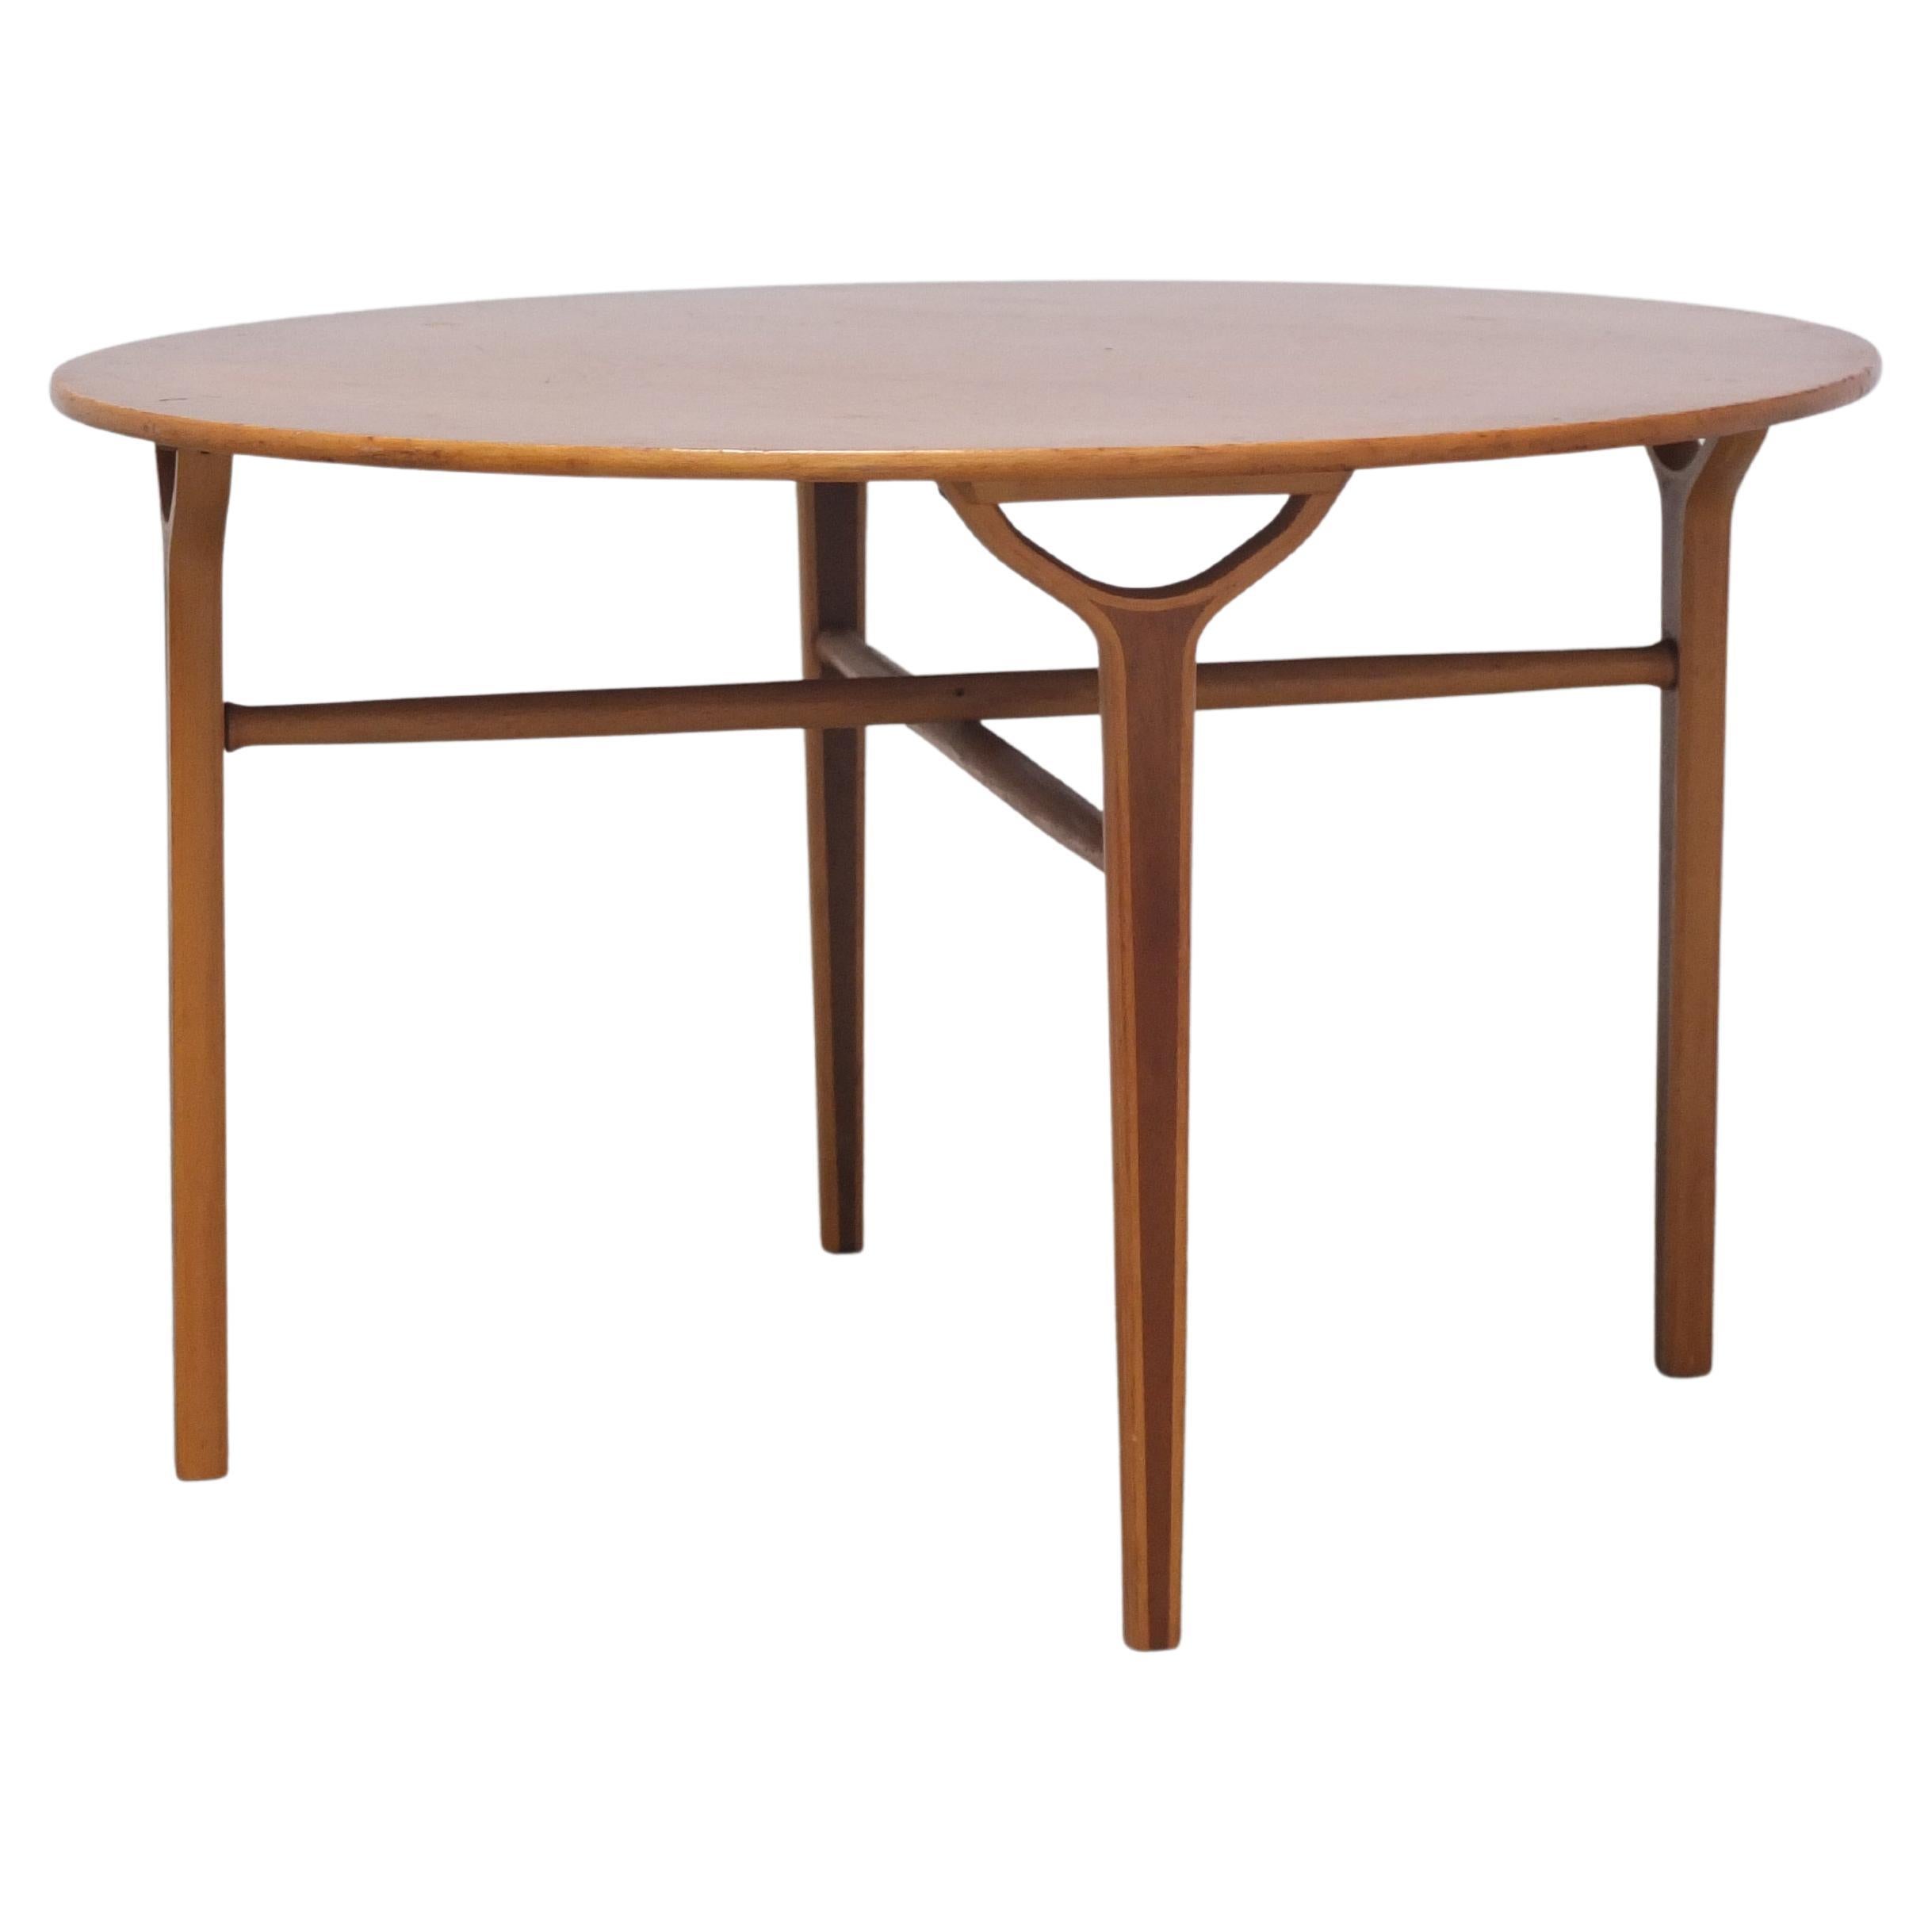 Rare 'AX' Coffee Table by Peter Hvidt & Orla Mølgaard for Fritz Hansen, 1951 For Sale